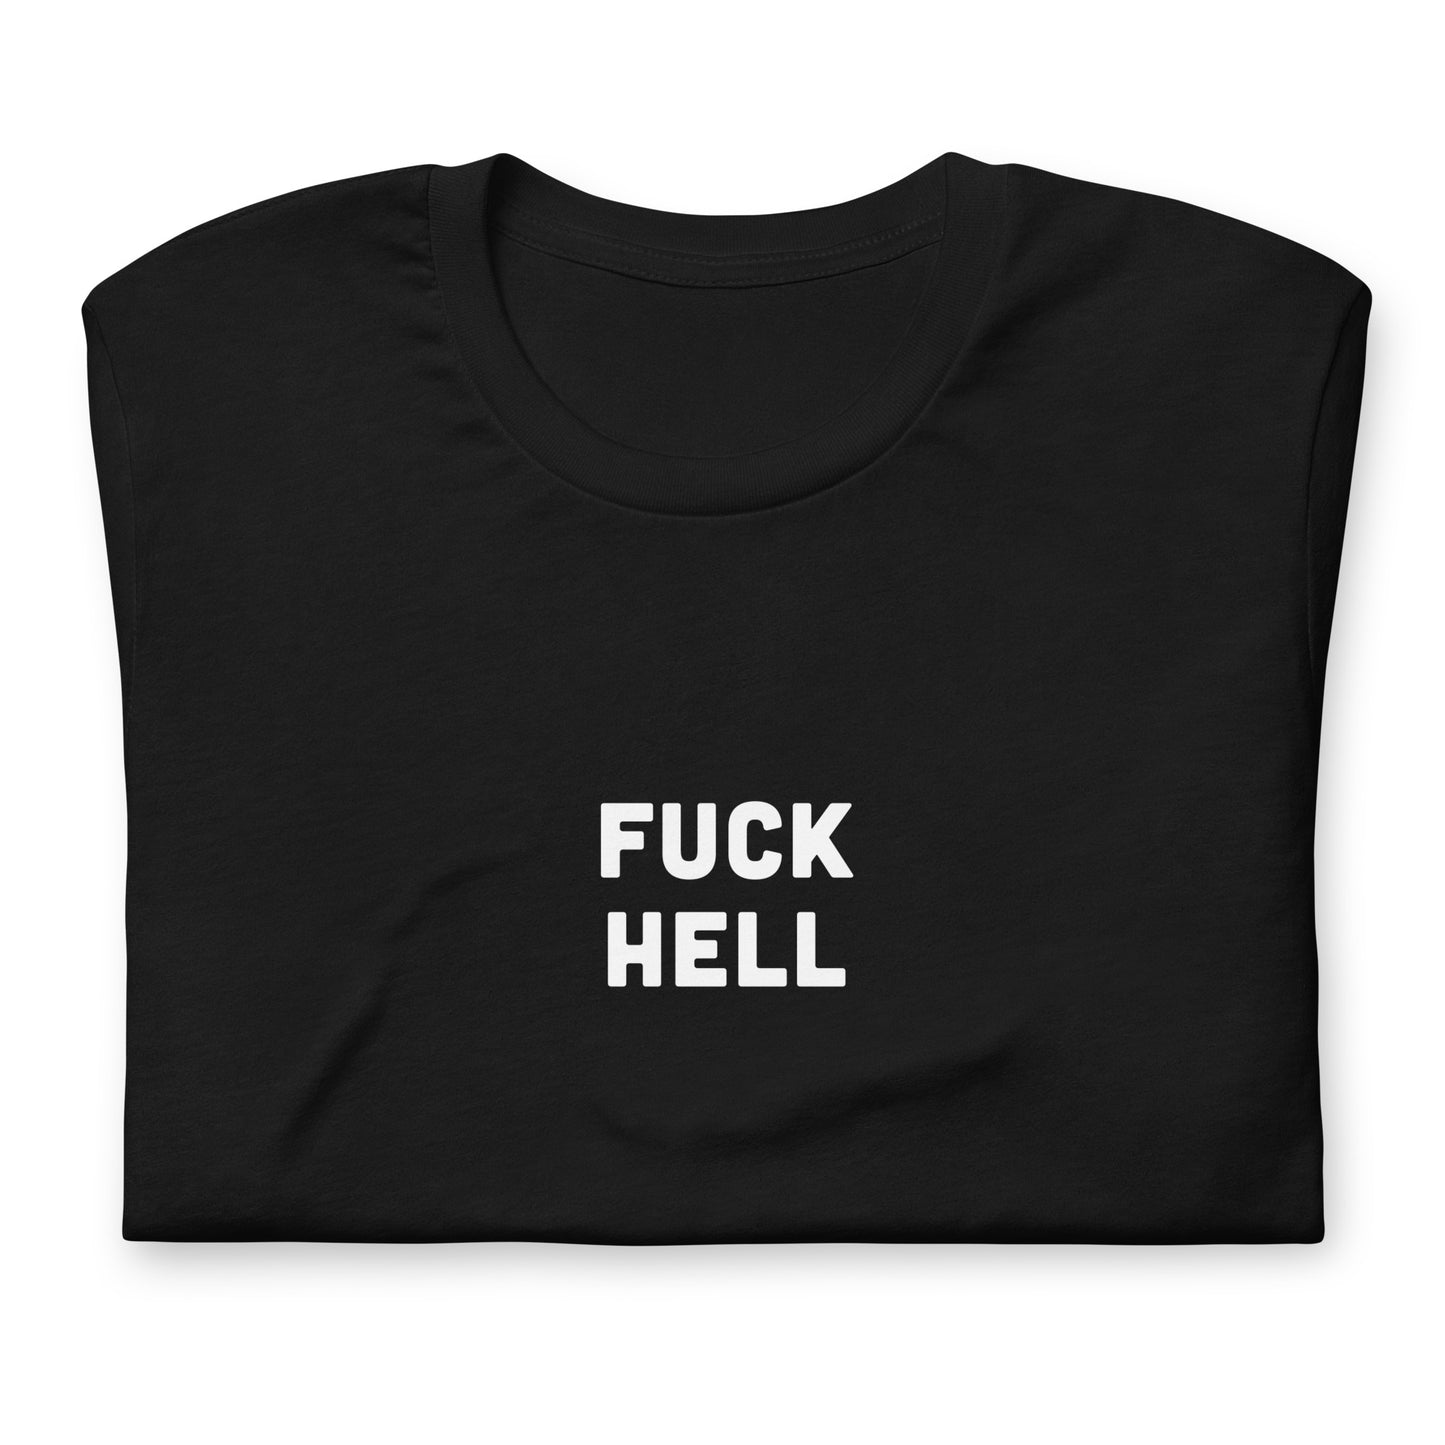 Fuck Hell T-Shirt Size M Color Black